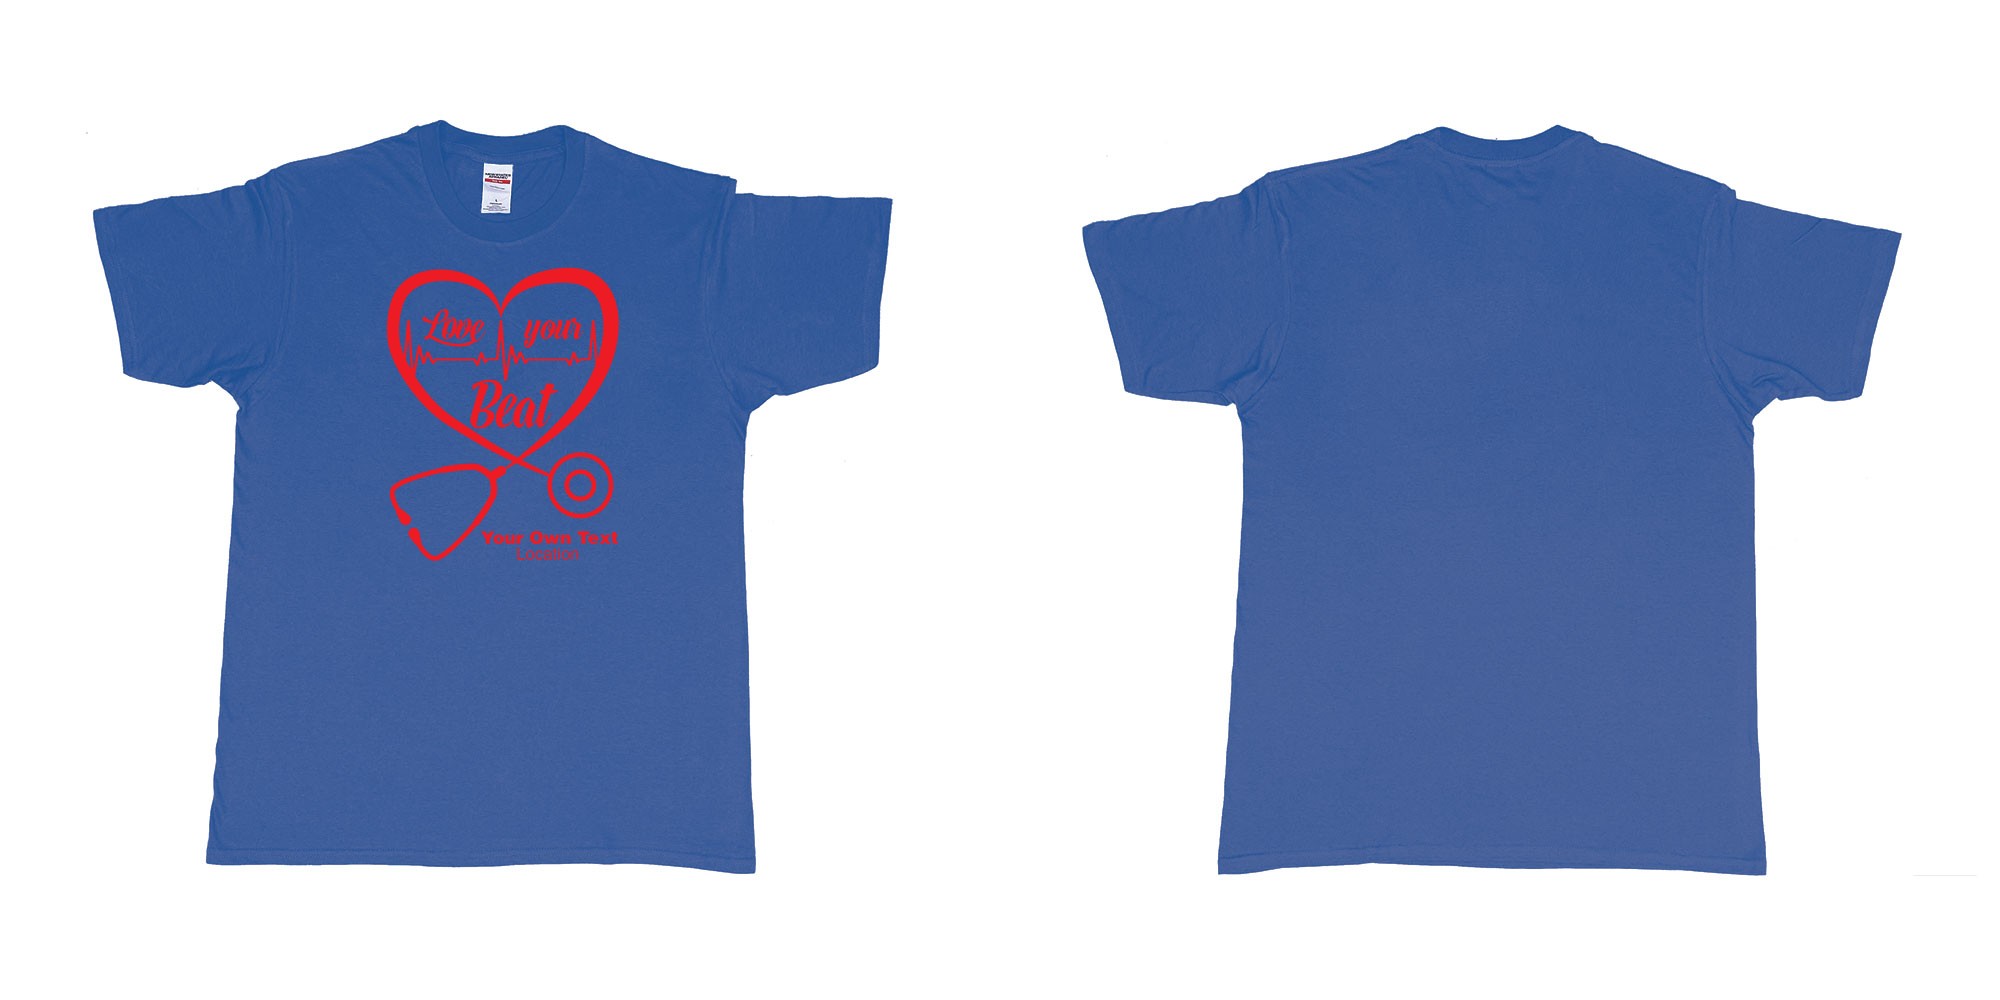 Custom tshirt design stethoscope doctor love your beat hearth custom tshirt print in fabric color royal-blue choice your own text made in Bali by The Pirate Way